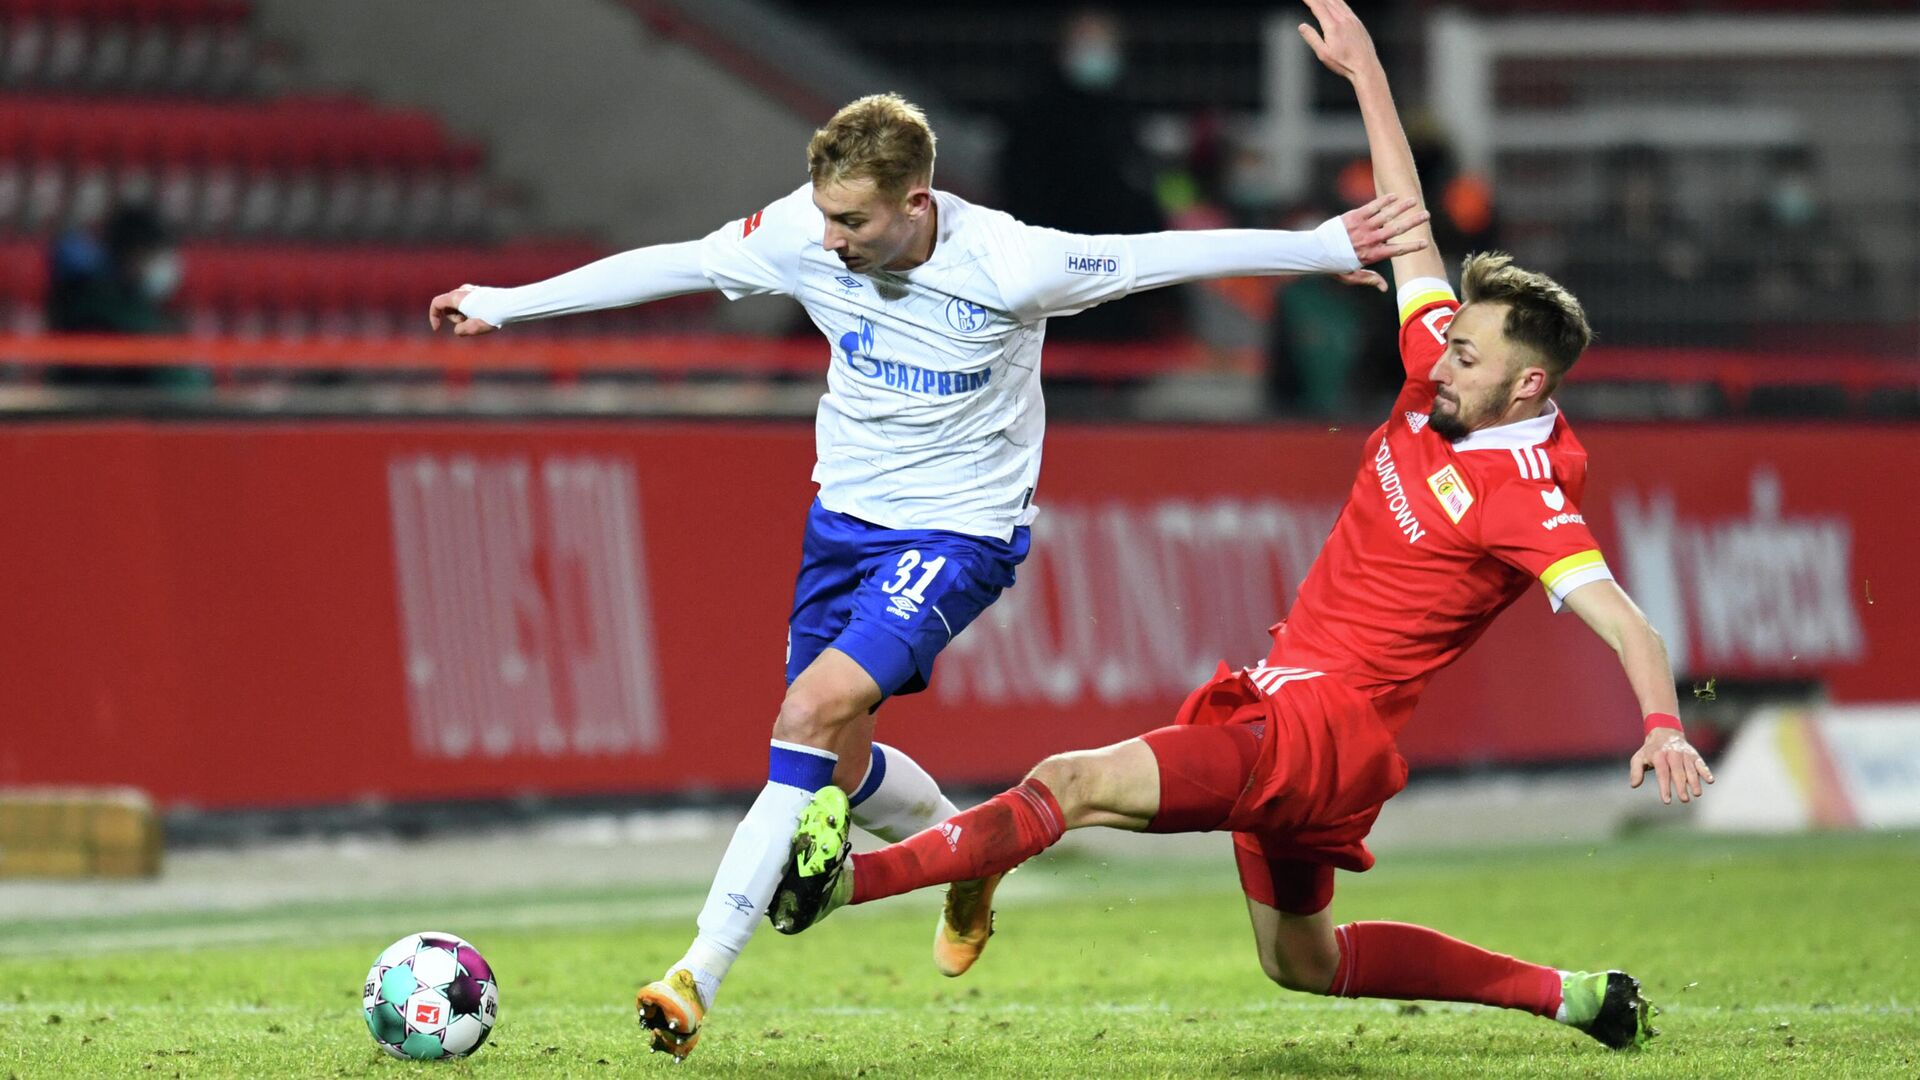 Schalke's German defender Timo Becker (L) and Union Berlin's German midfielder Robert Andrich vie for the ball during the German first division Bundesliga football match between 1 FC Union Berlin and FC Schalke 04 in Berlin on February 13, 2021. (Photo by ANNEGRET HILSE / POOL / AFP) / DFL REGULATIONS PROHIBIT ANY USE OF PHOTOGRAPHS AS IMAGE SEQUENCES AND/OR QUASI-VIDEO - РИА Новости, 1920, 13.02.2021